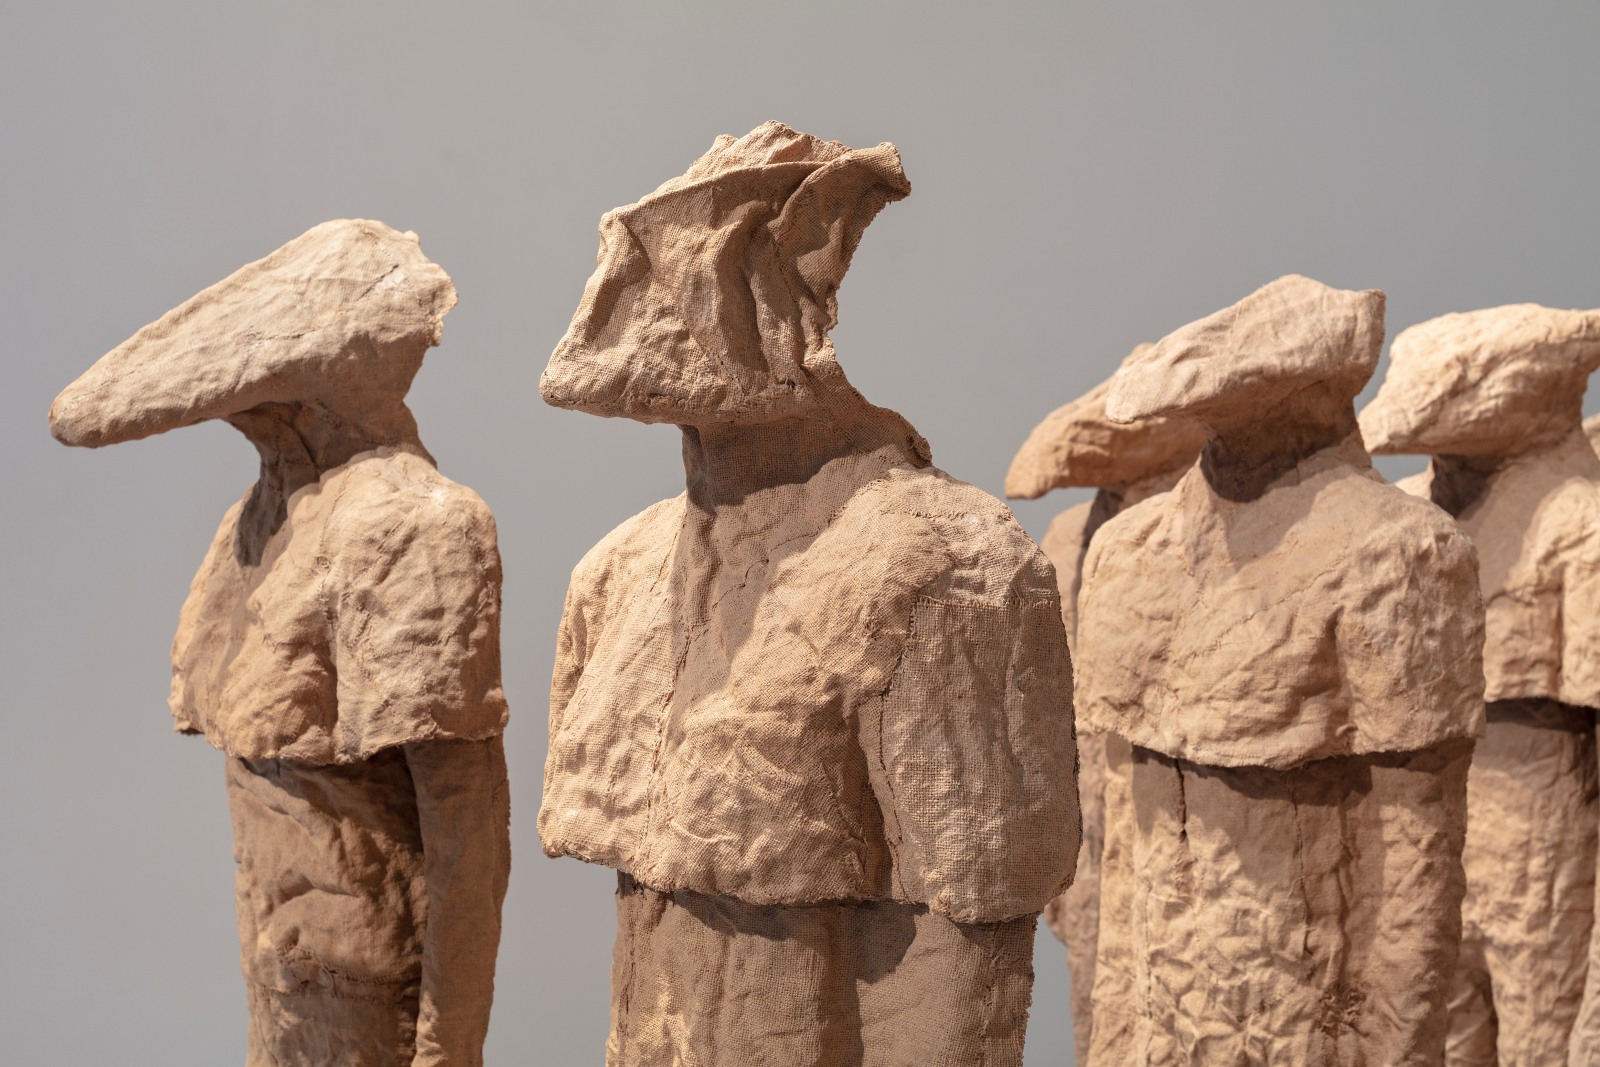 Detail view of multiple burlap and resin figures with different heads by Magdalena Abakanowicz